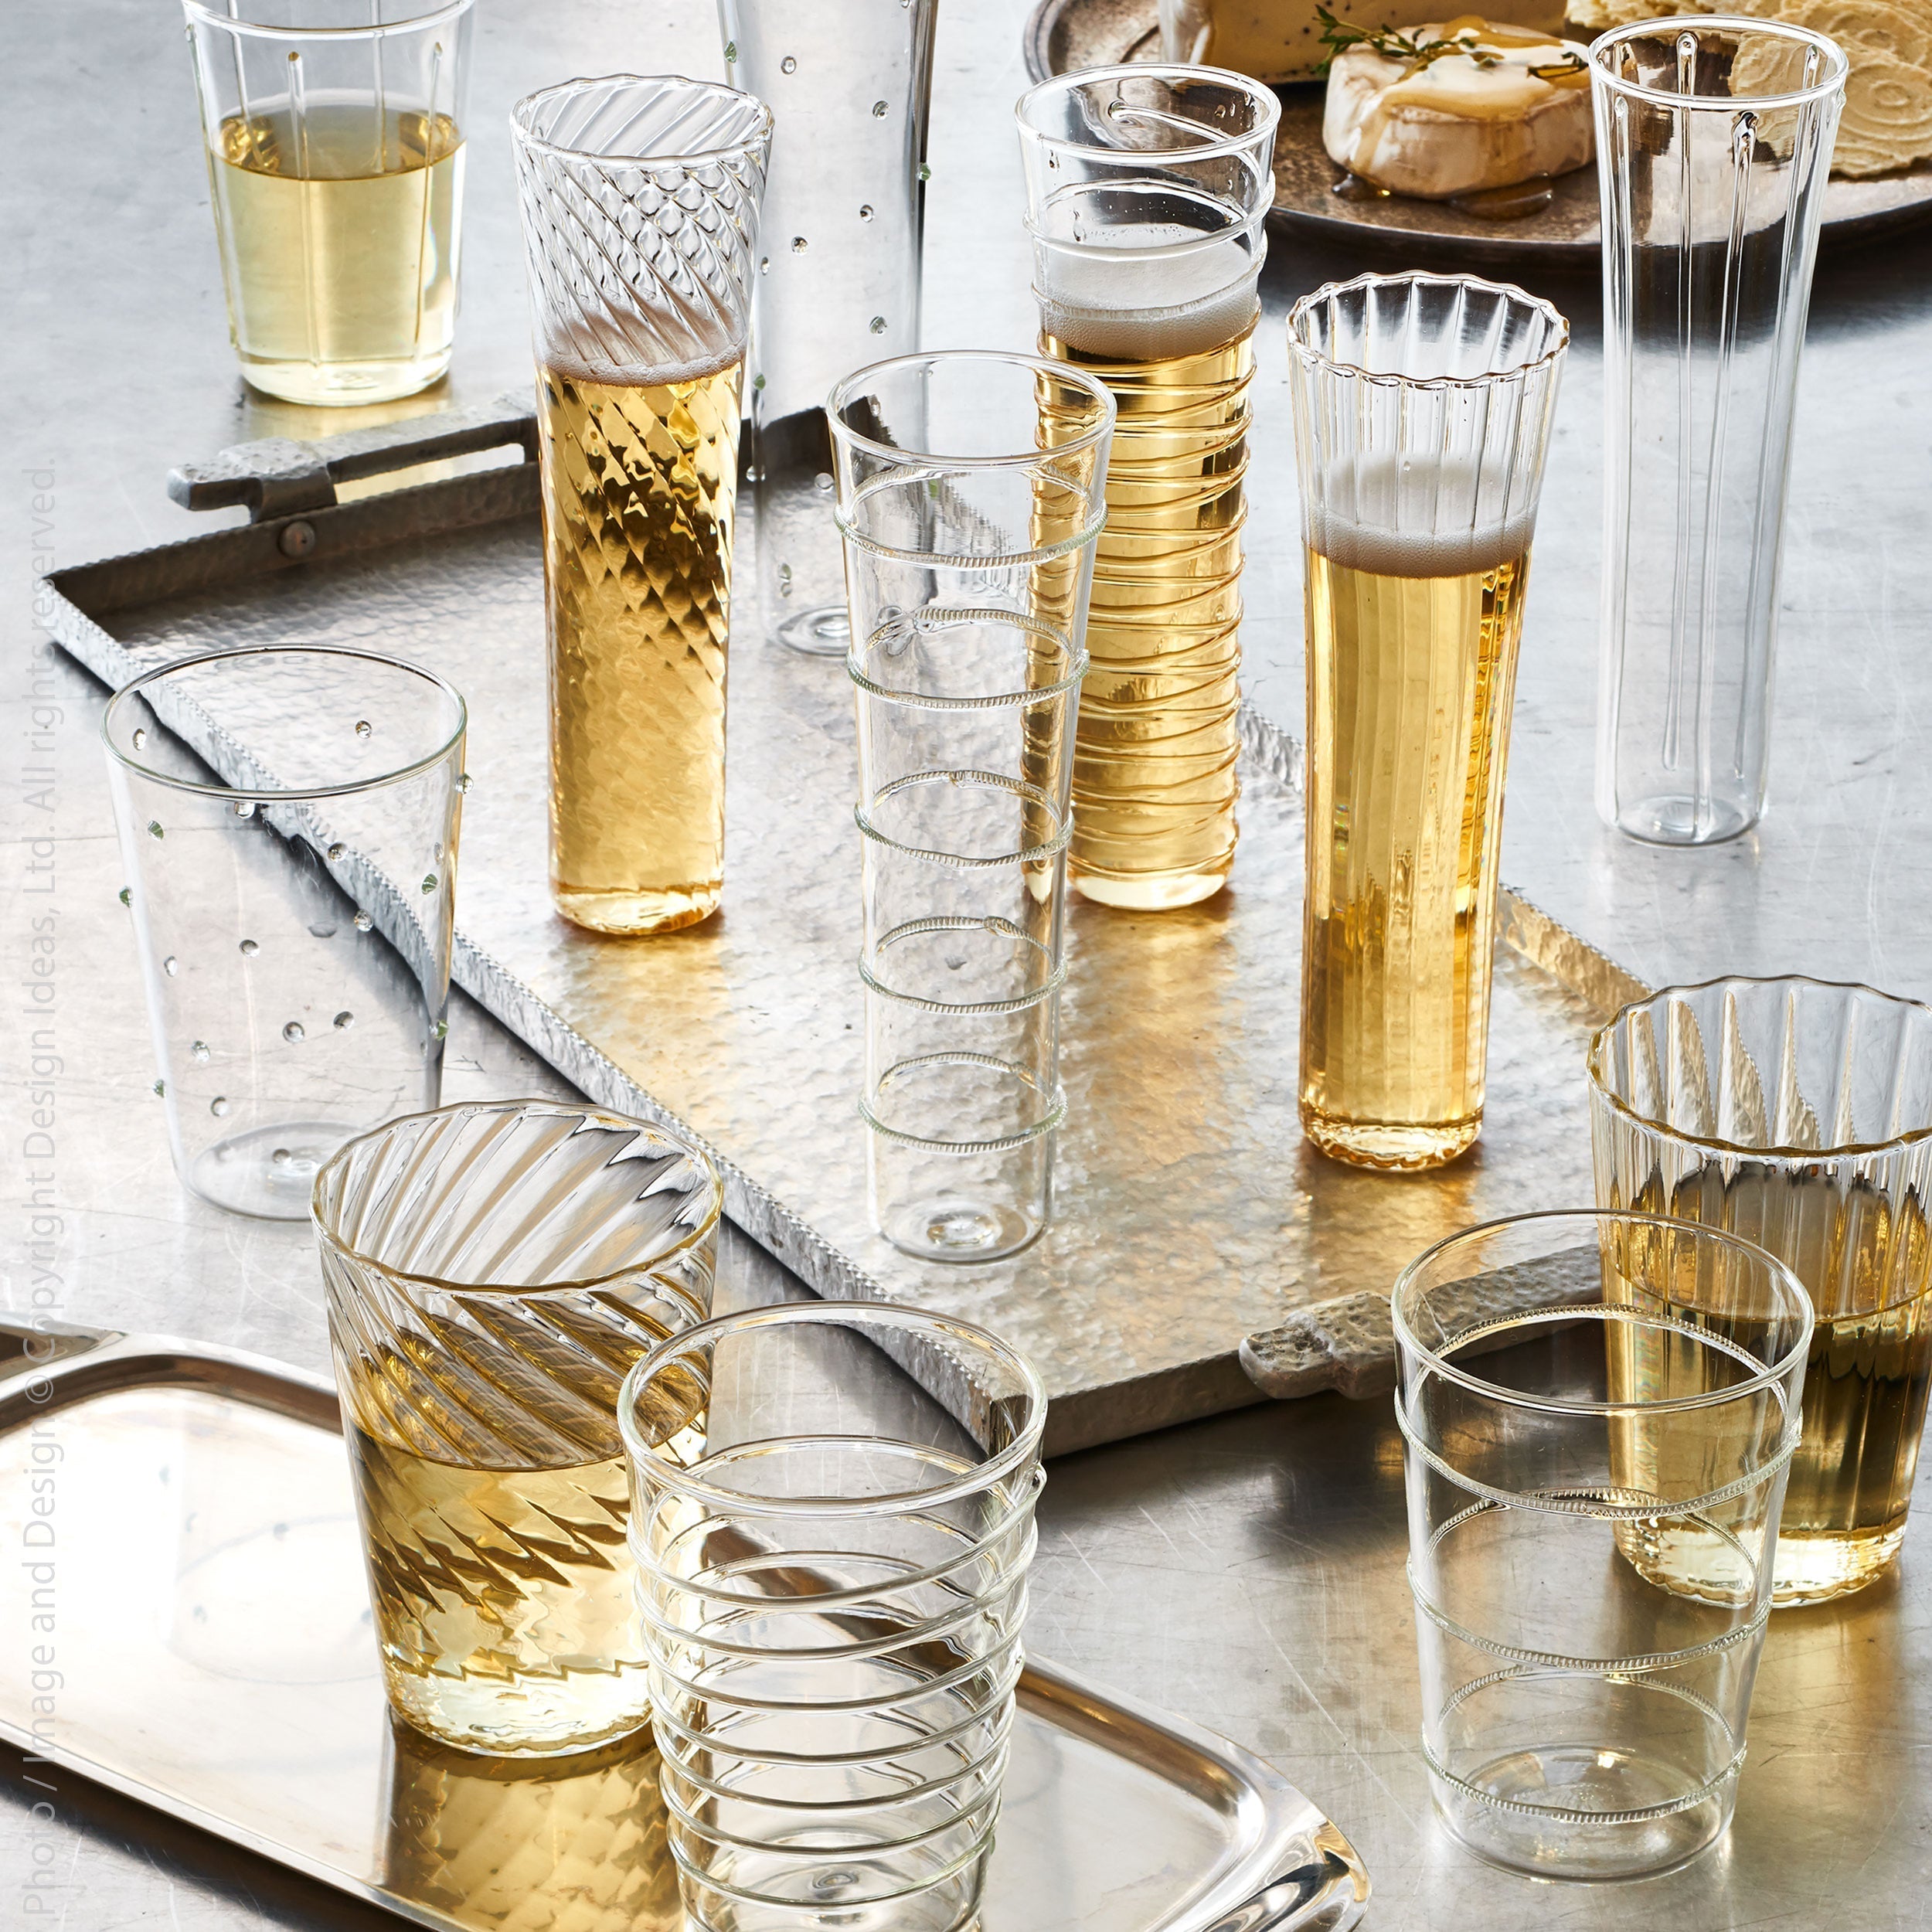 Livenza™ drinking glasses (9.8 oz.: set of 6) - Clear | Image 3 | Premium Glass from the Livenza collection | made with Borosilicate Glass for long lasting use | texxture